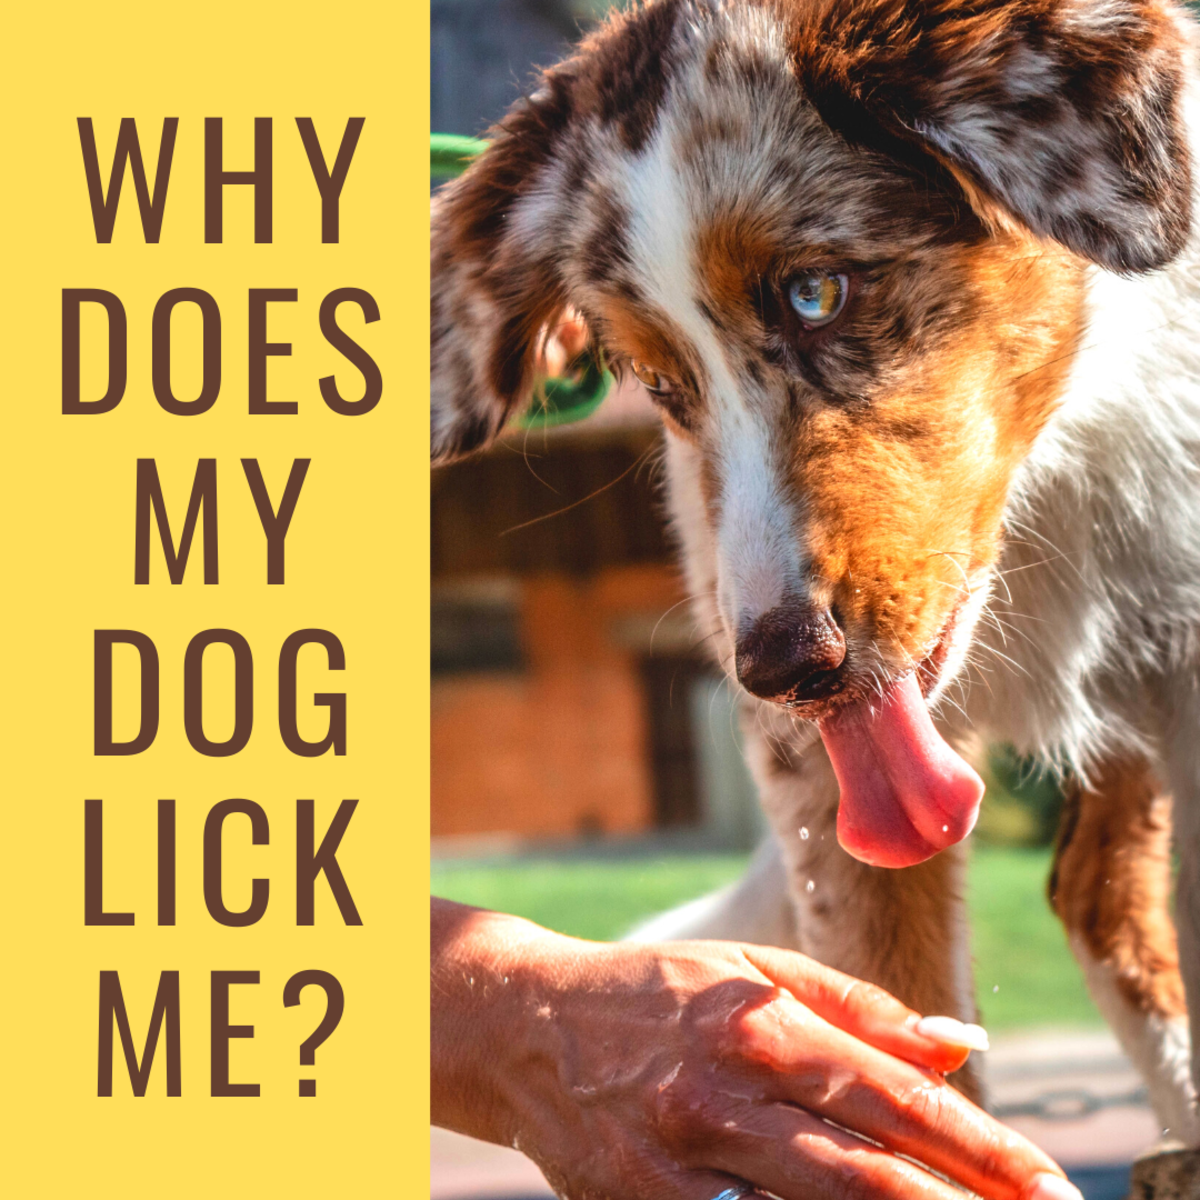 Find out more about why dogs lick people.